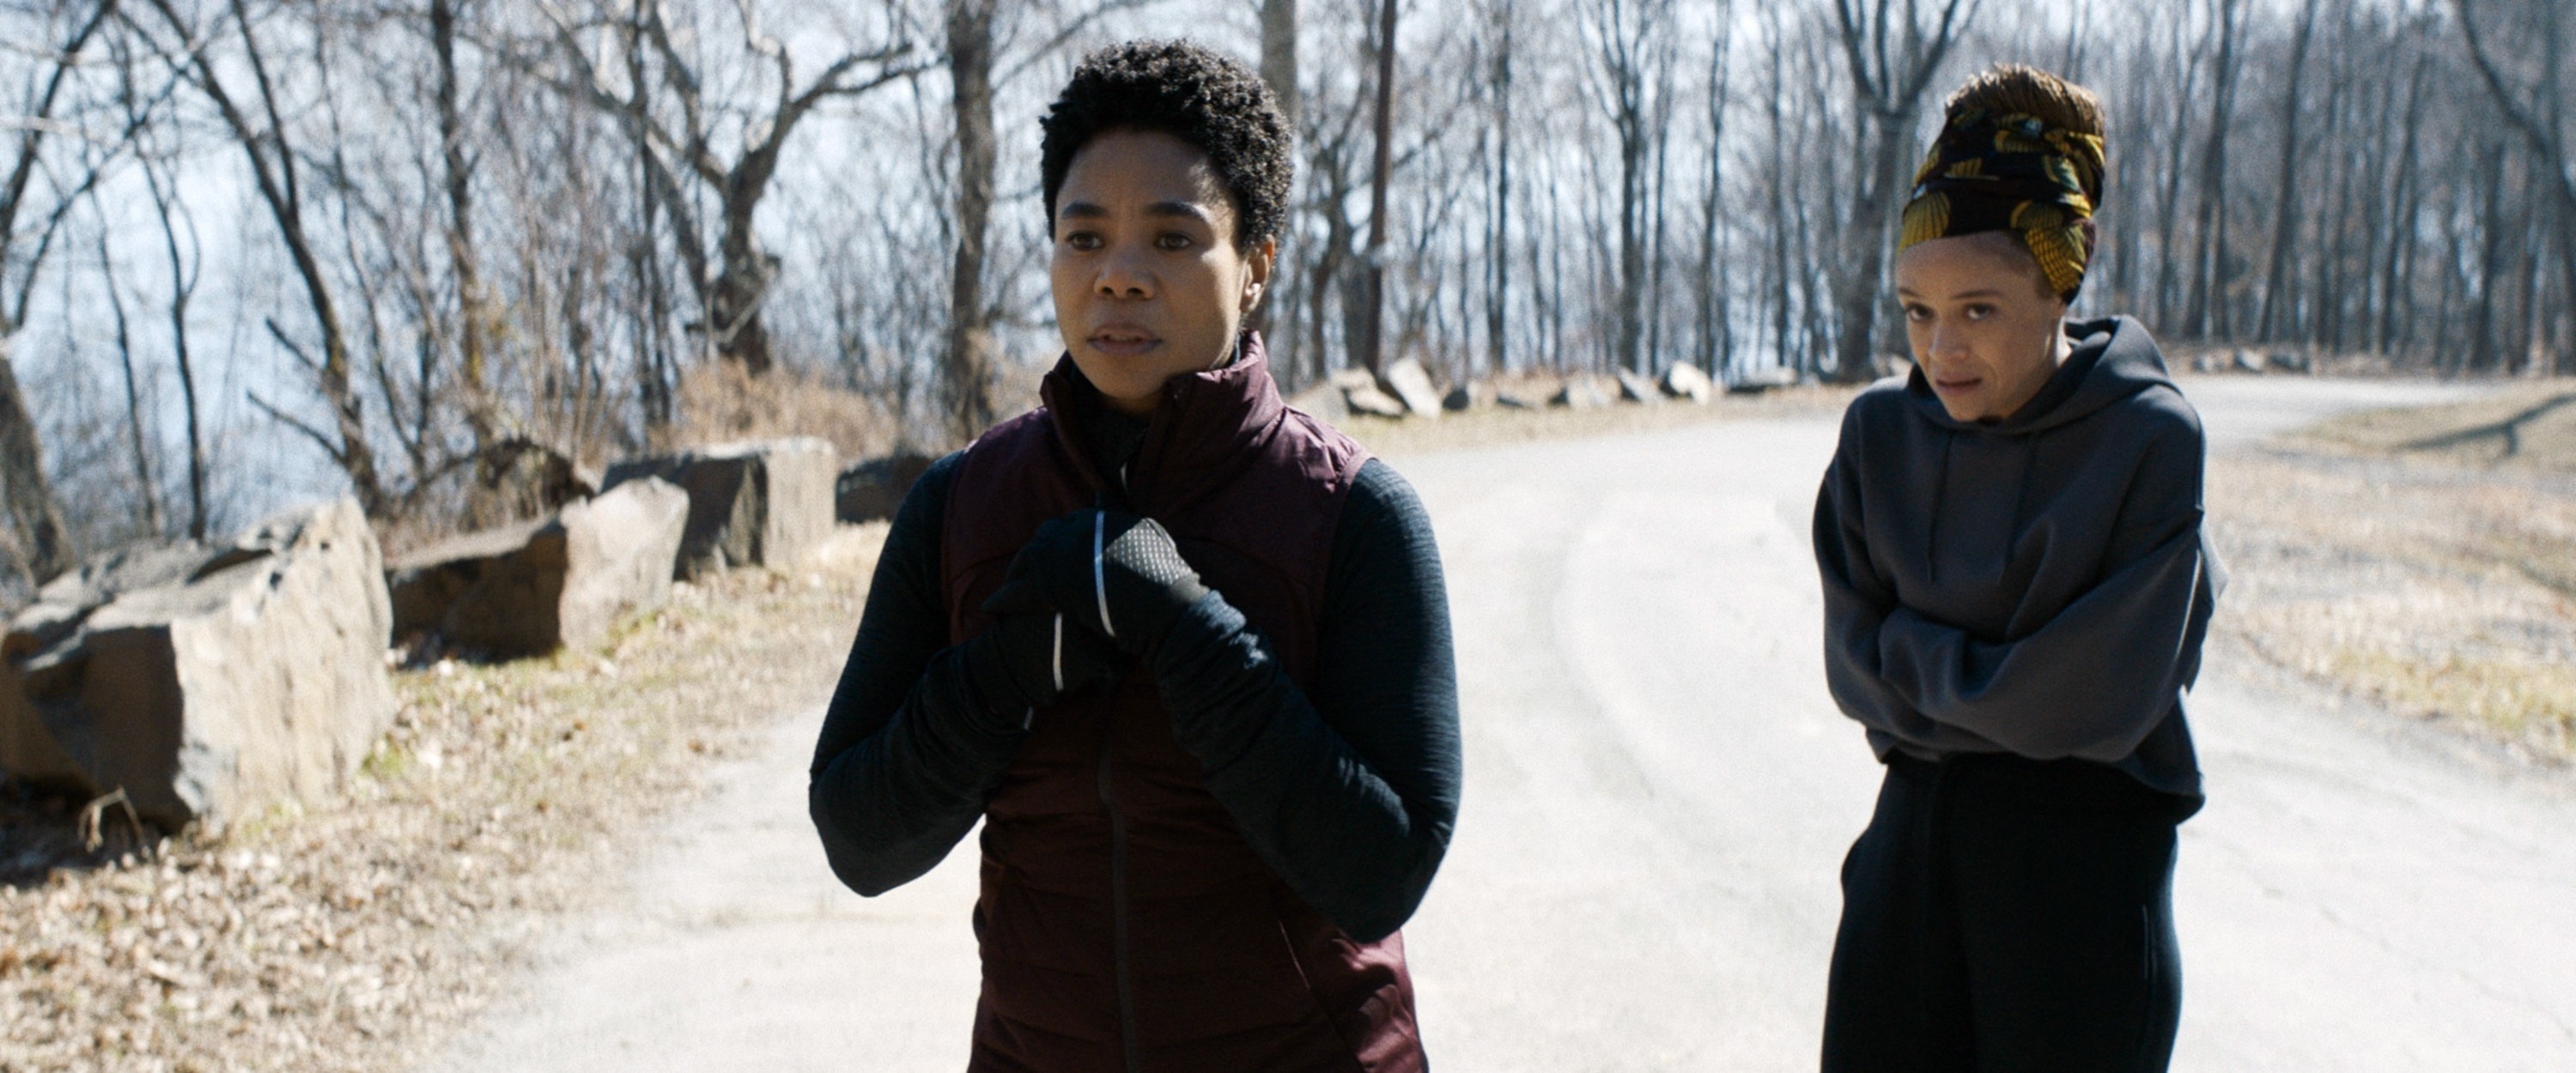 Regina Hall and Amber Gray on a run together